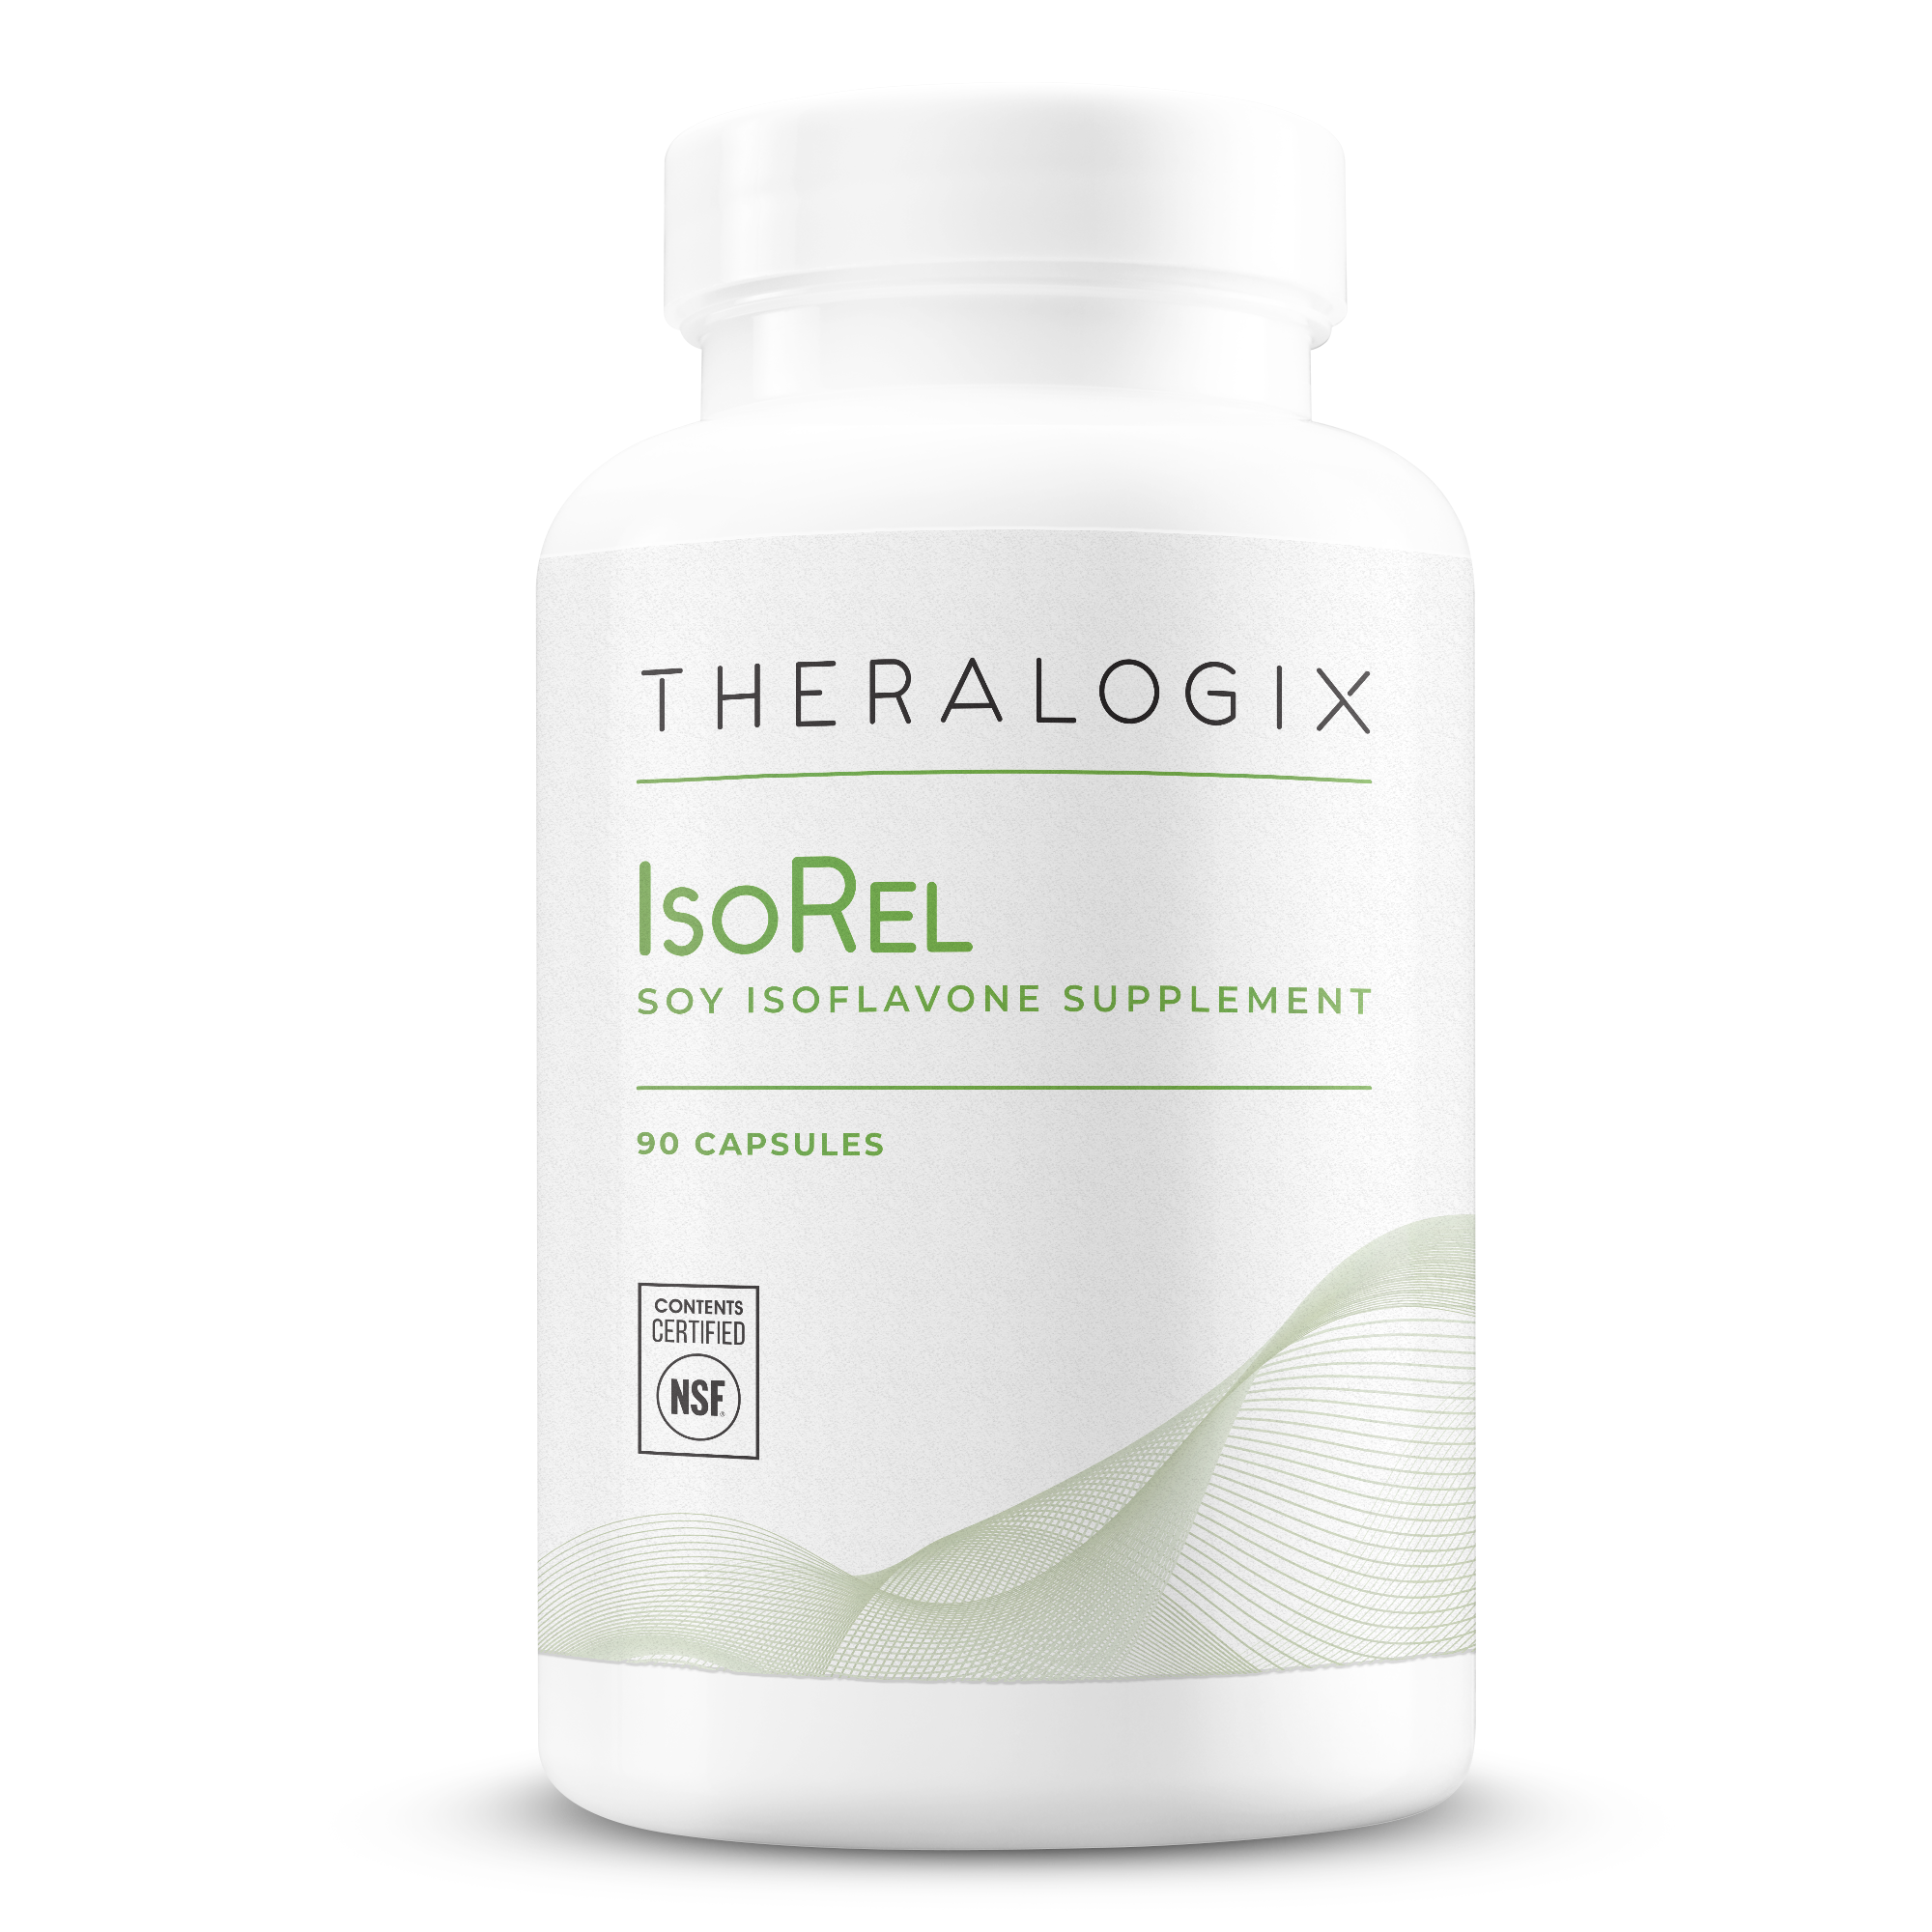 Physician recommended IsoRel Whole Soybean Extract Supplement containins soy isoflavones to reduce menopause hot flashes and promote cardiovascular and prostate health.